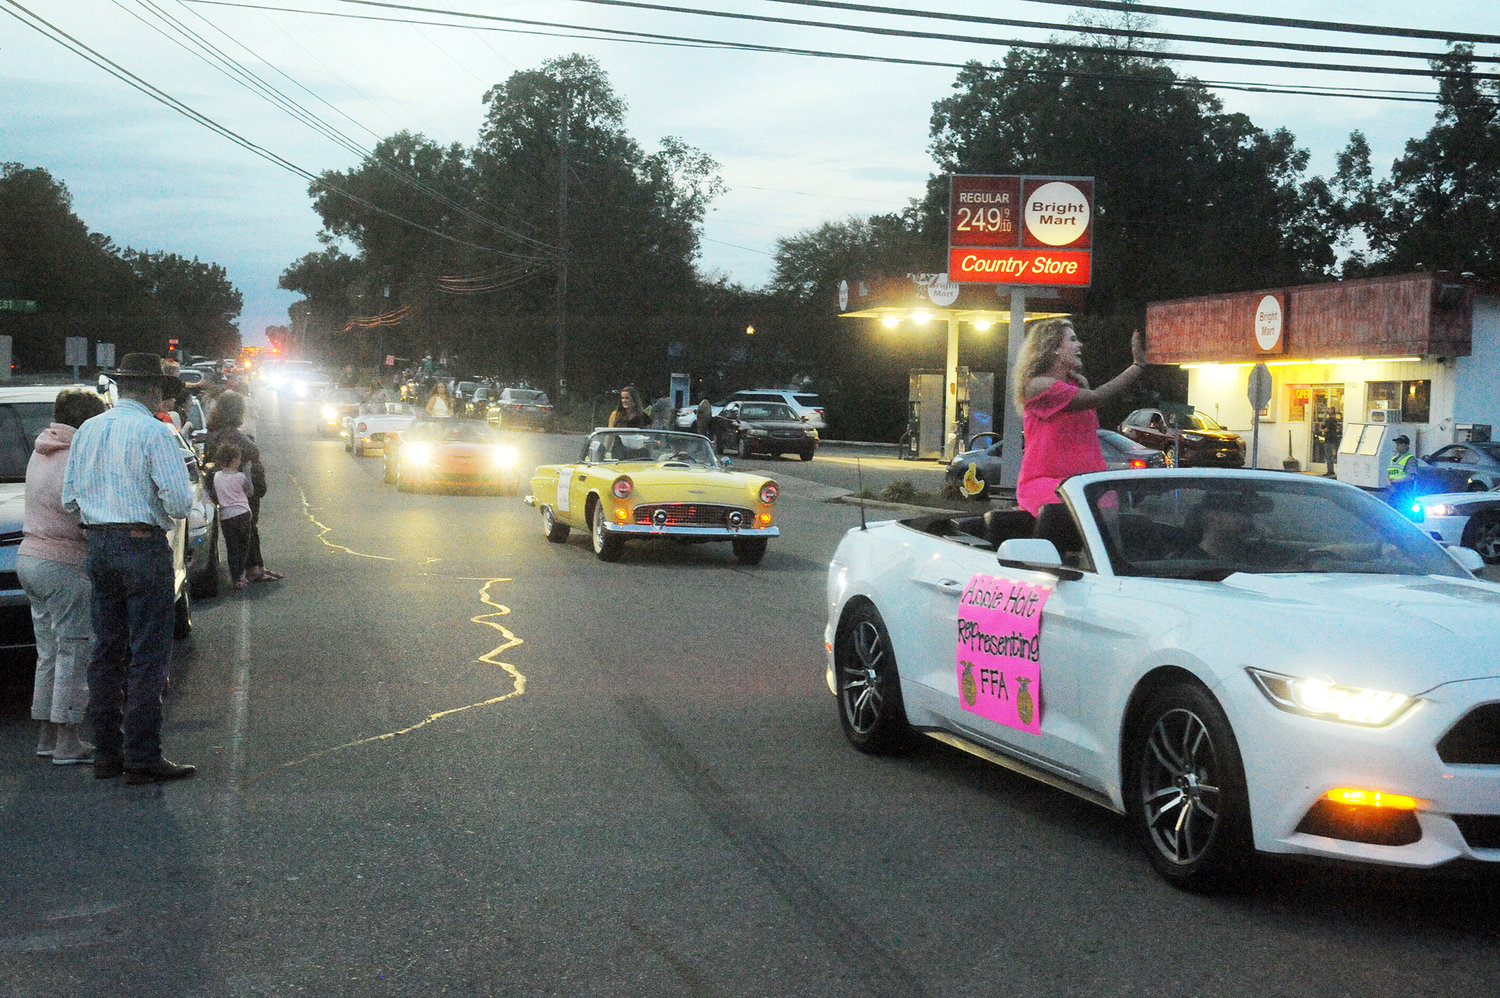 The 2019 Chatham Central Homecoming Parade brought school fans from across the area to celebrate the annual event in downtown Goldston last Monday night. Representatives of the science club and other school organizations rode classic cars down Main Street, along with members of the tennis and football teams, and fire and rescue equipment from the city.